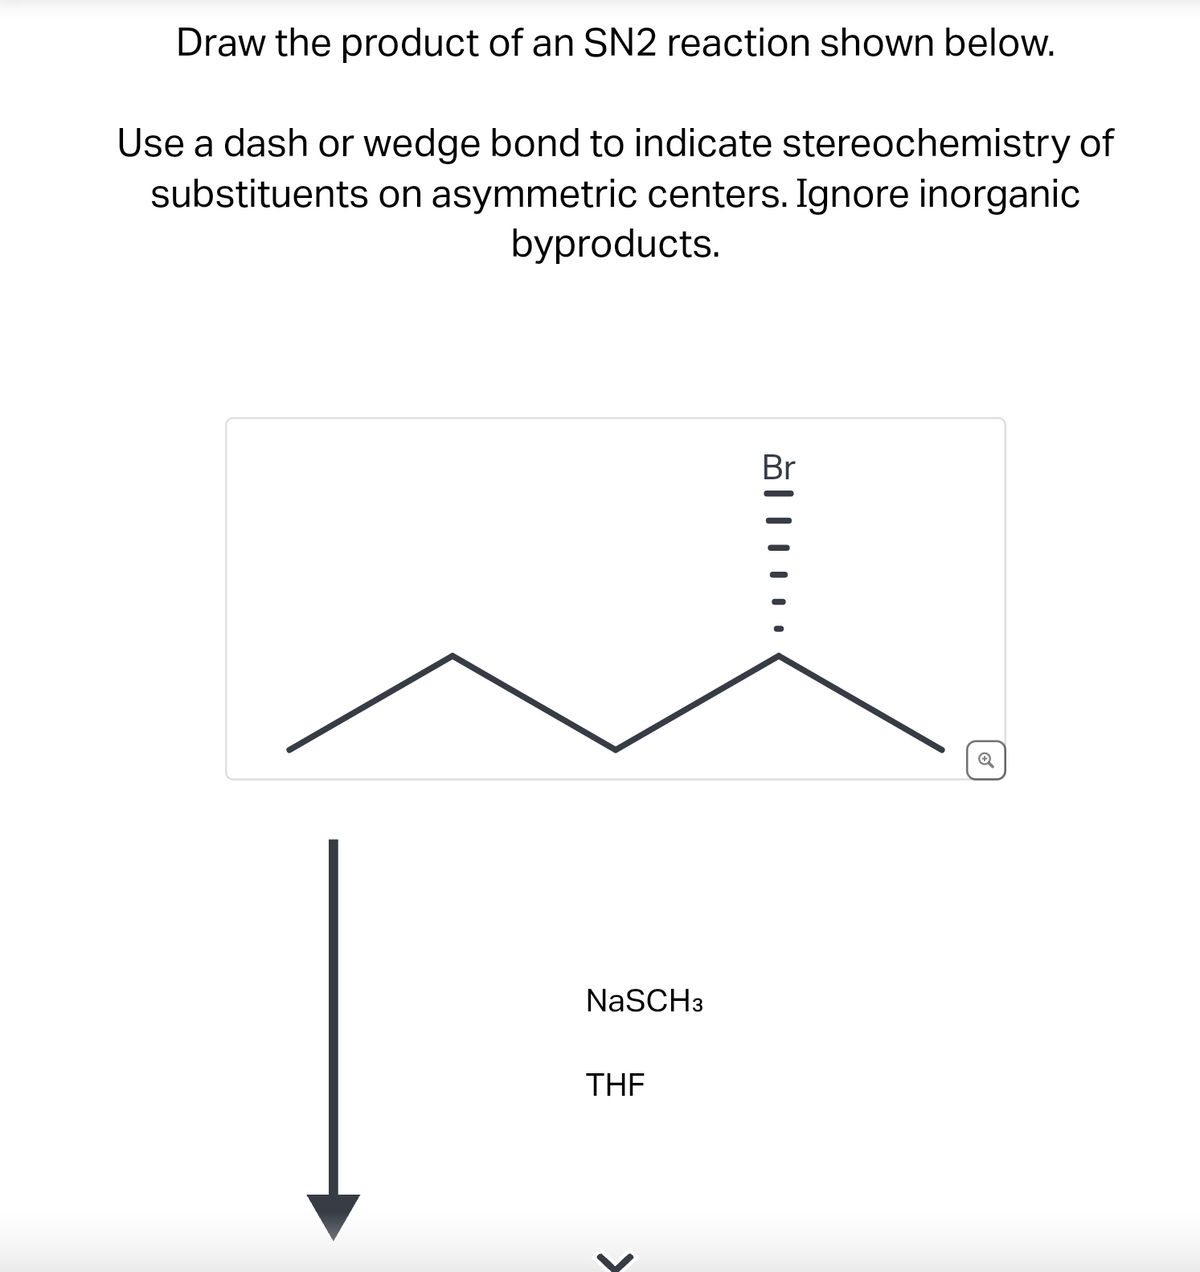 Draw the product of an SN2 reaction shown below.
Use a dash or wedge bond to indicate stereochemistry of
substituents on asymmetric centers. Ignore inorganic
byproducts.
NaSCH 3
THE
Br
ŏ|||…..